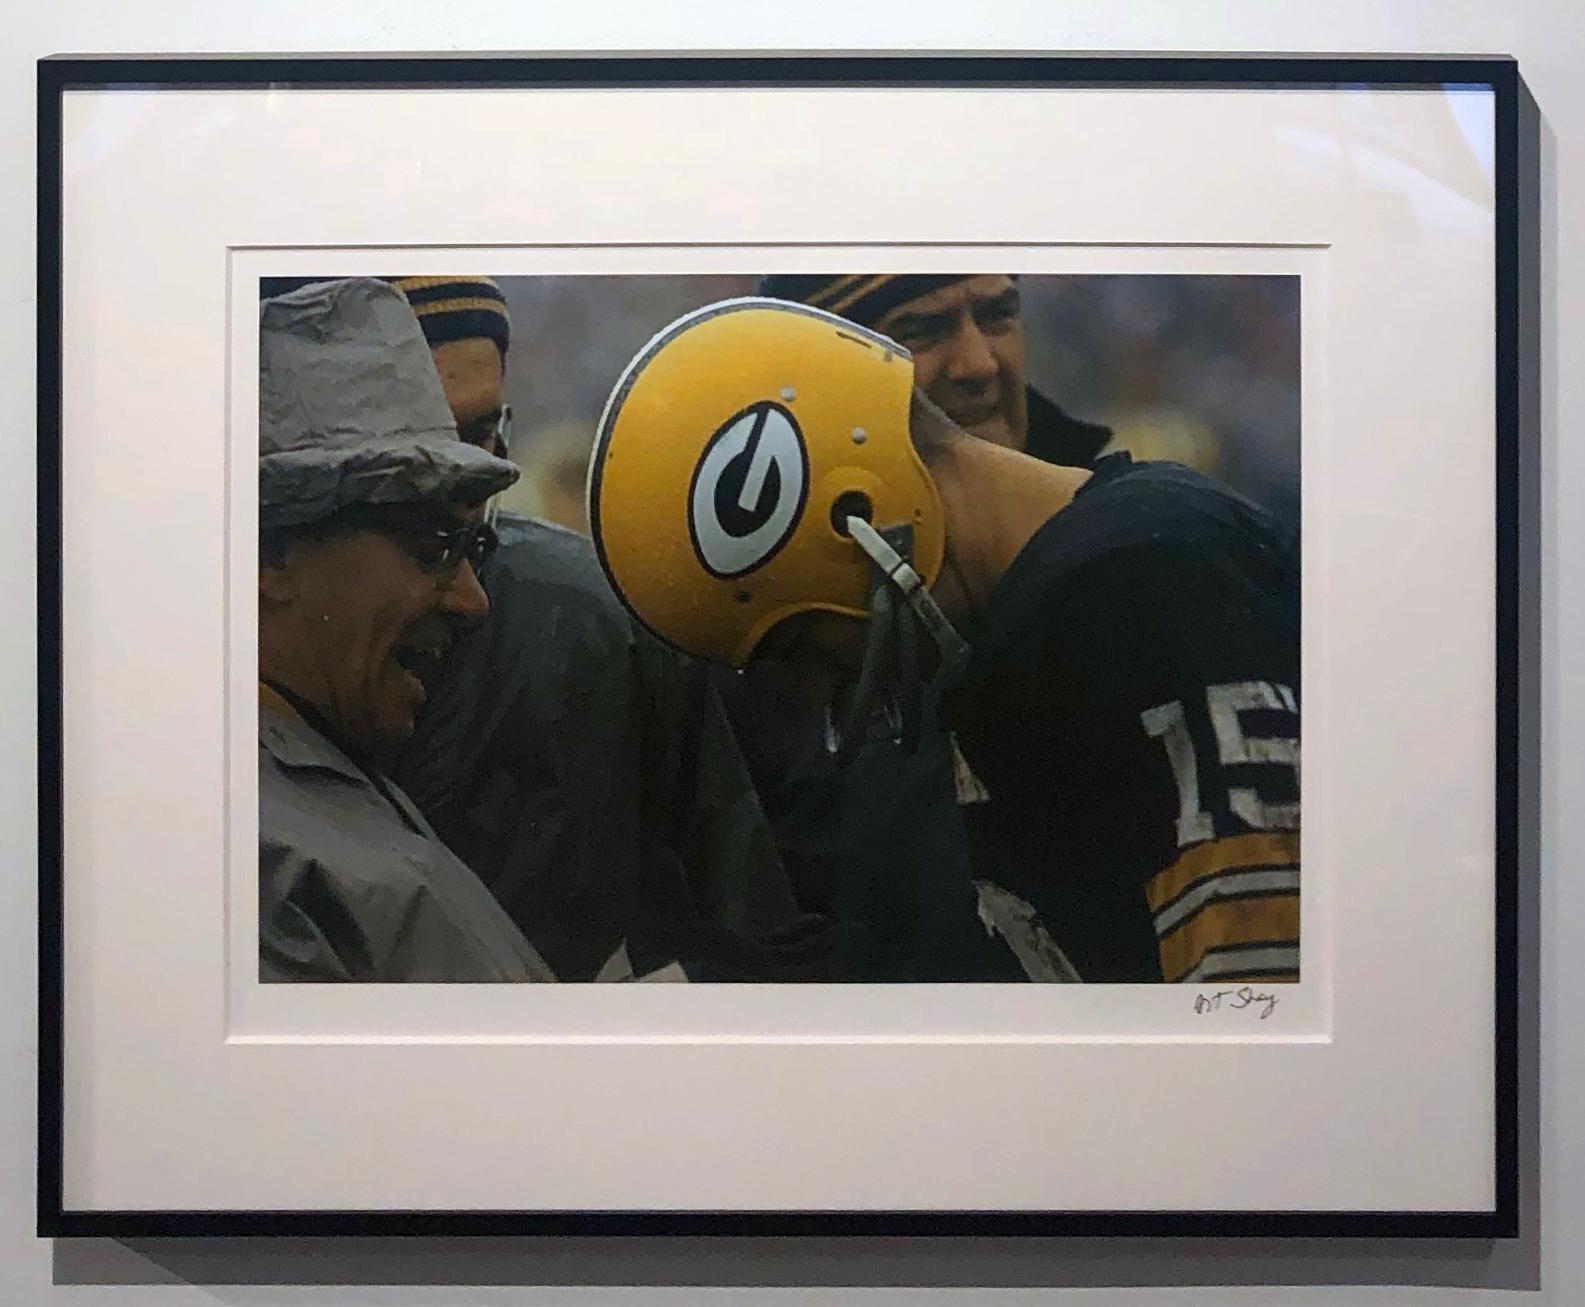 Fallen Starr, 1966, Vince Lombardi Bawling Out Bart Starr, Green Bay Packers - Photograph by Art Shay